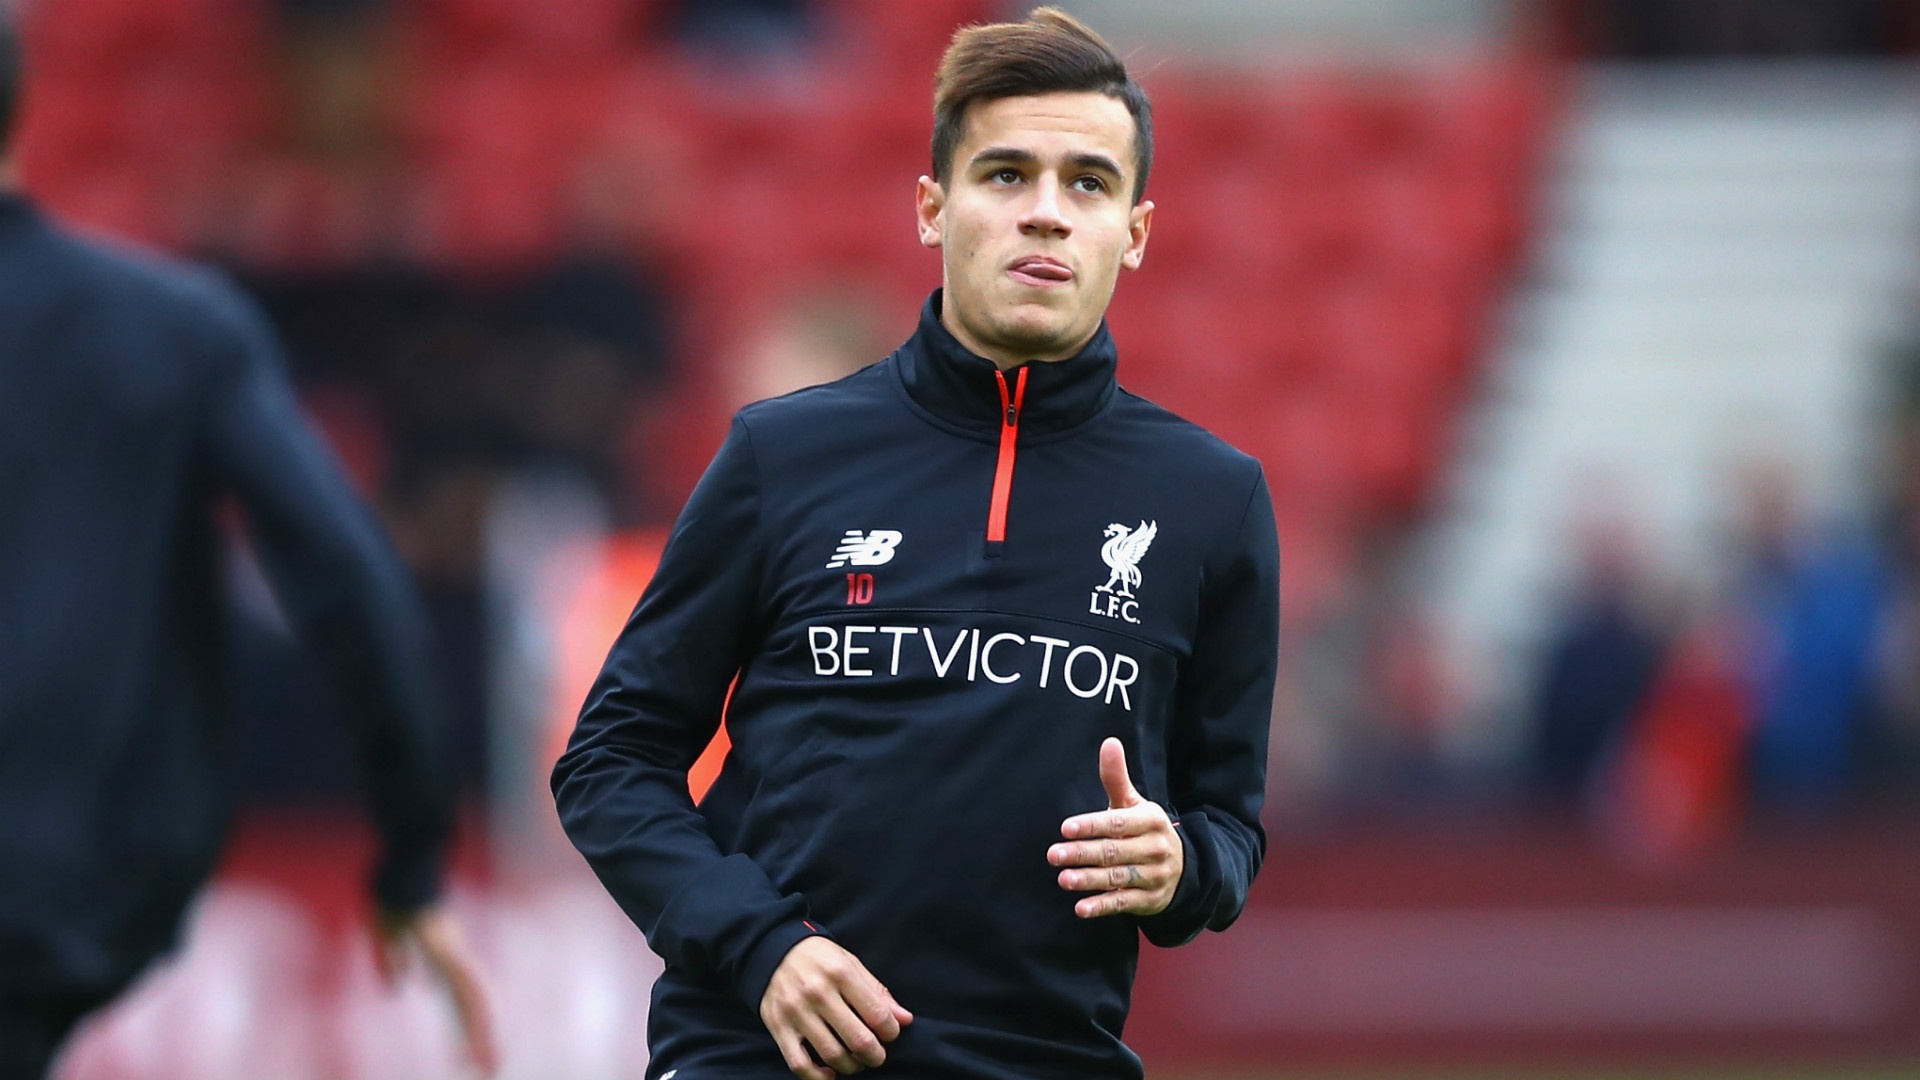 Hd Philippe Coutinho Liverpool - Philippe Coutinho Liverpool Hd - HD Wallpaper 